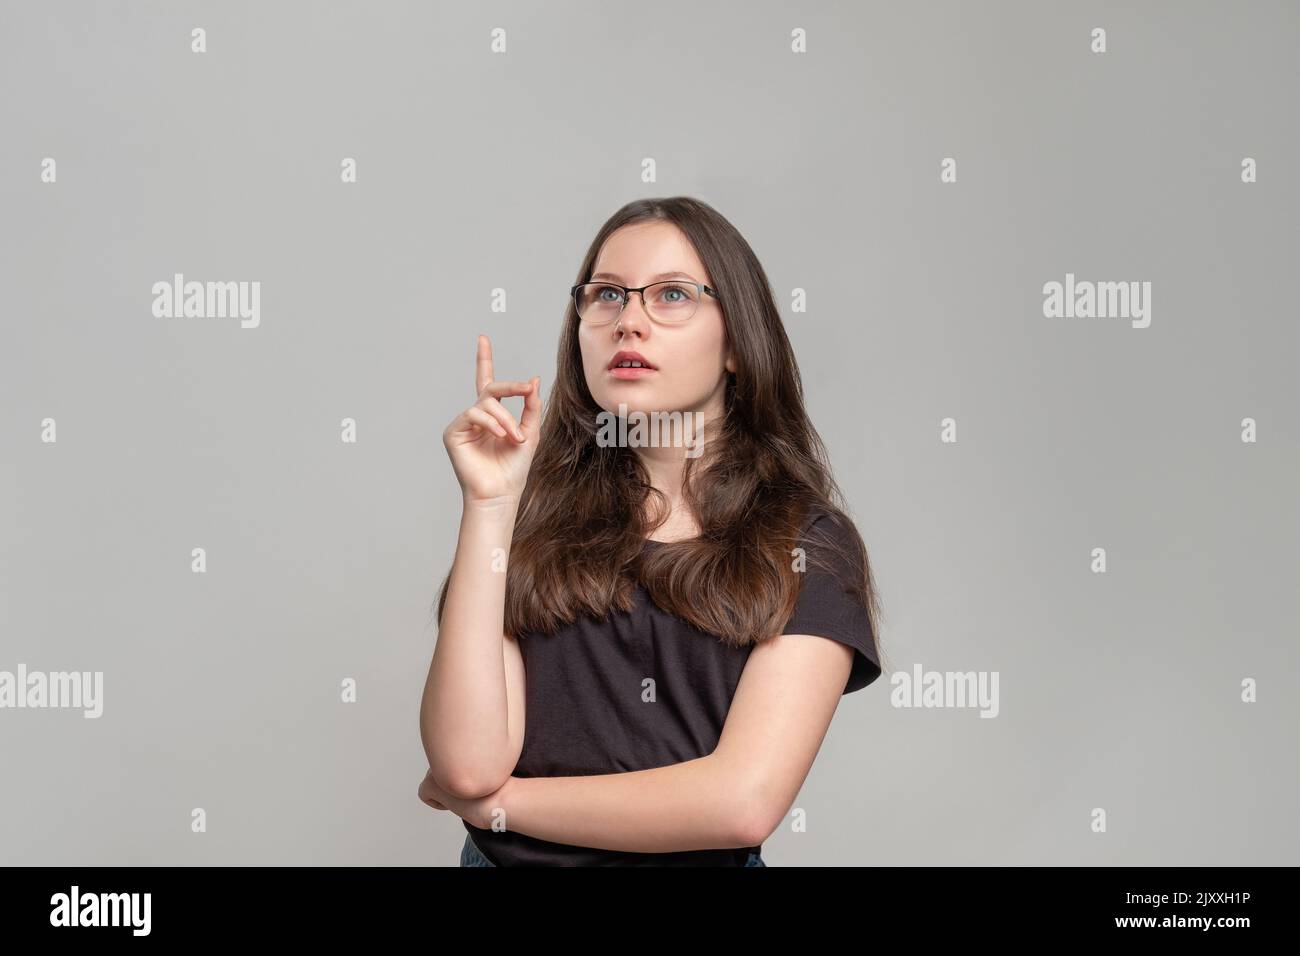 confused woman portrait doubtful lady considering Stock Photo